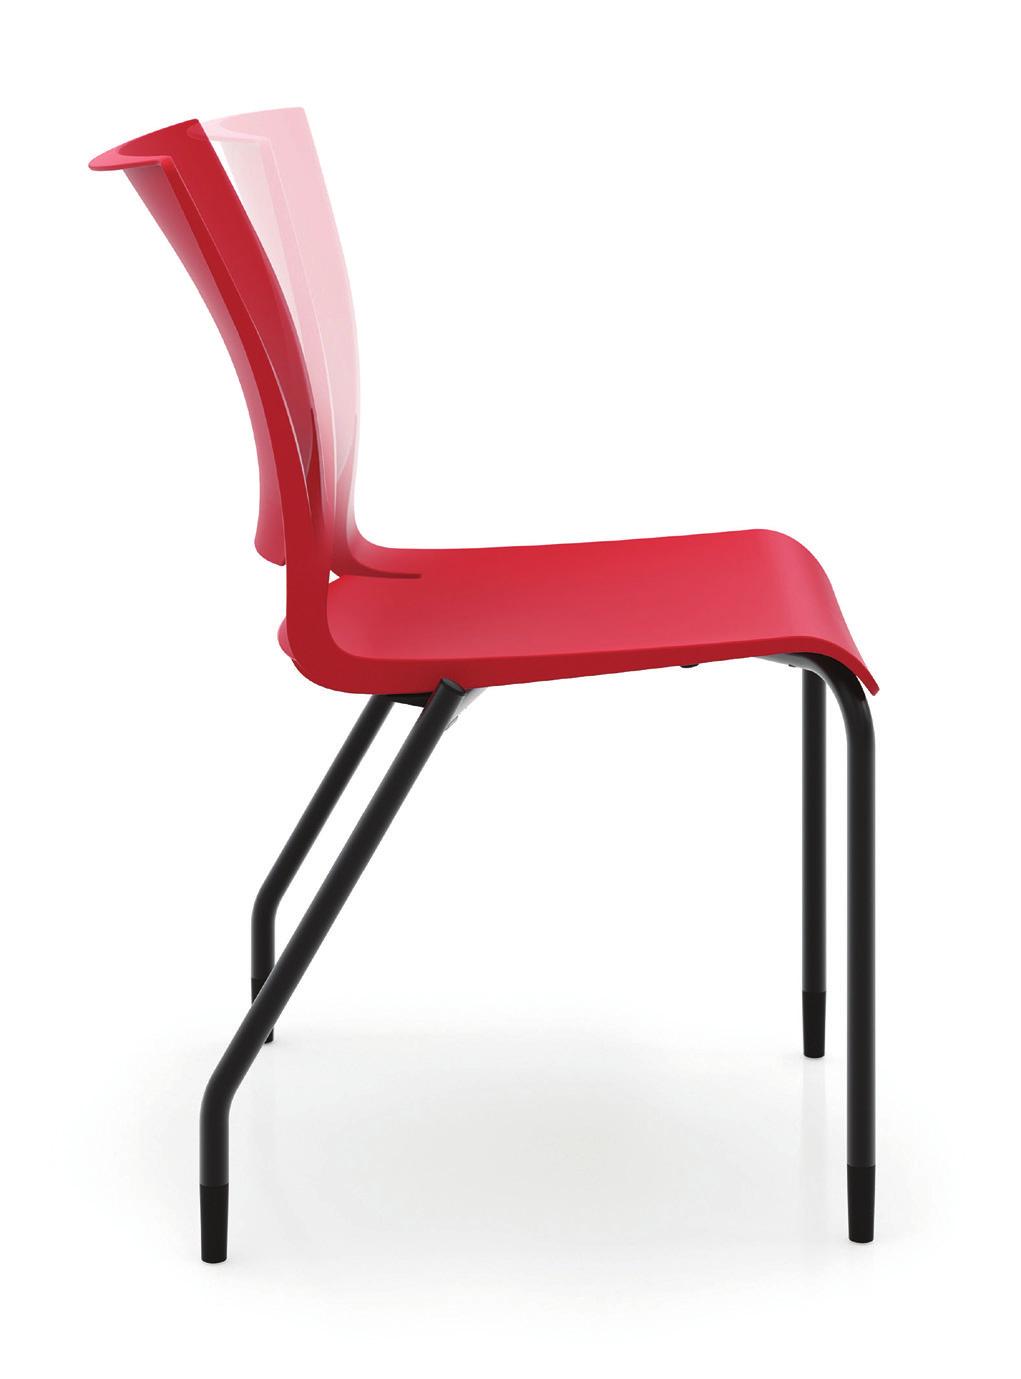 Featuring ARC Technology The single piece polymer shell features SitOnIt Seating ARC